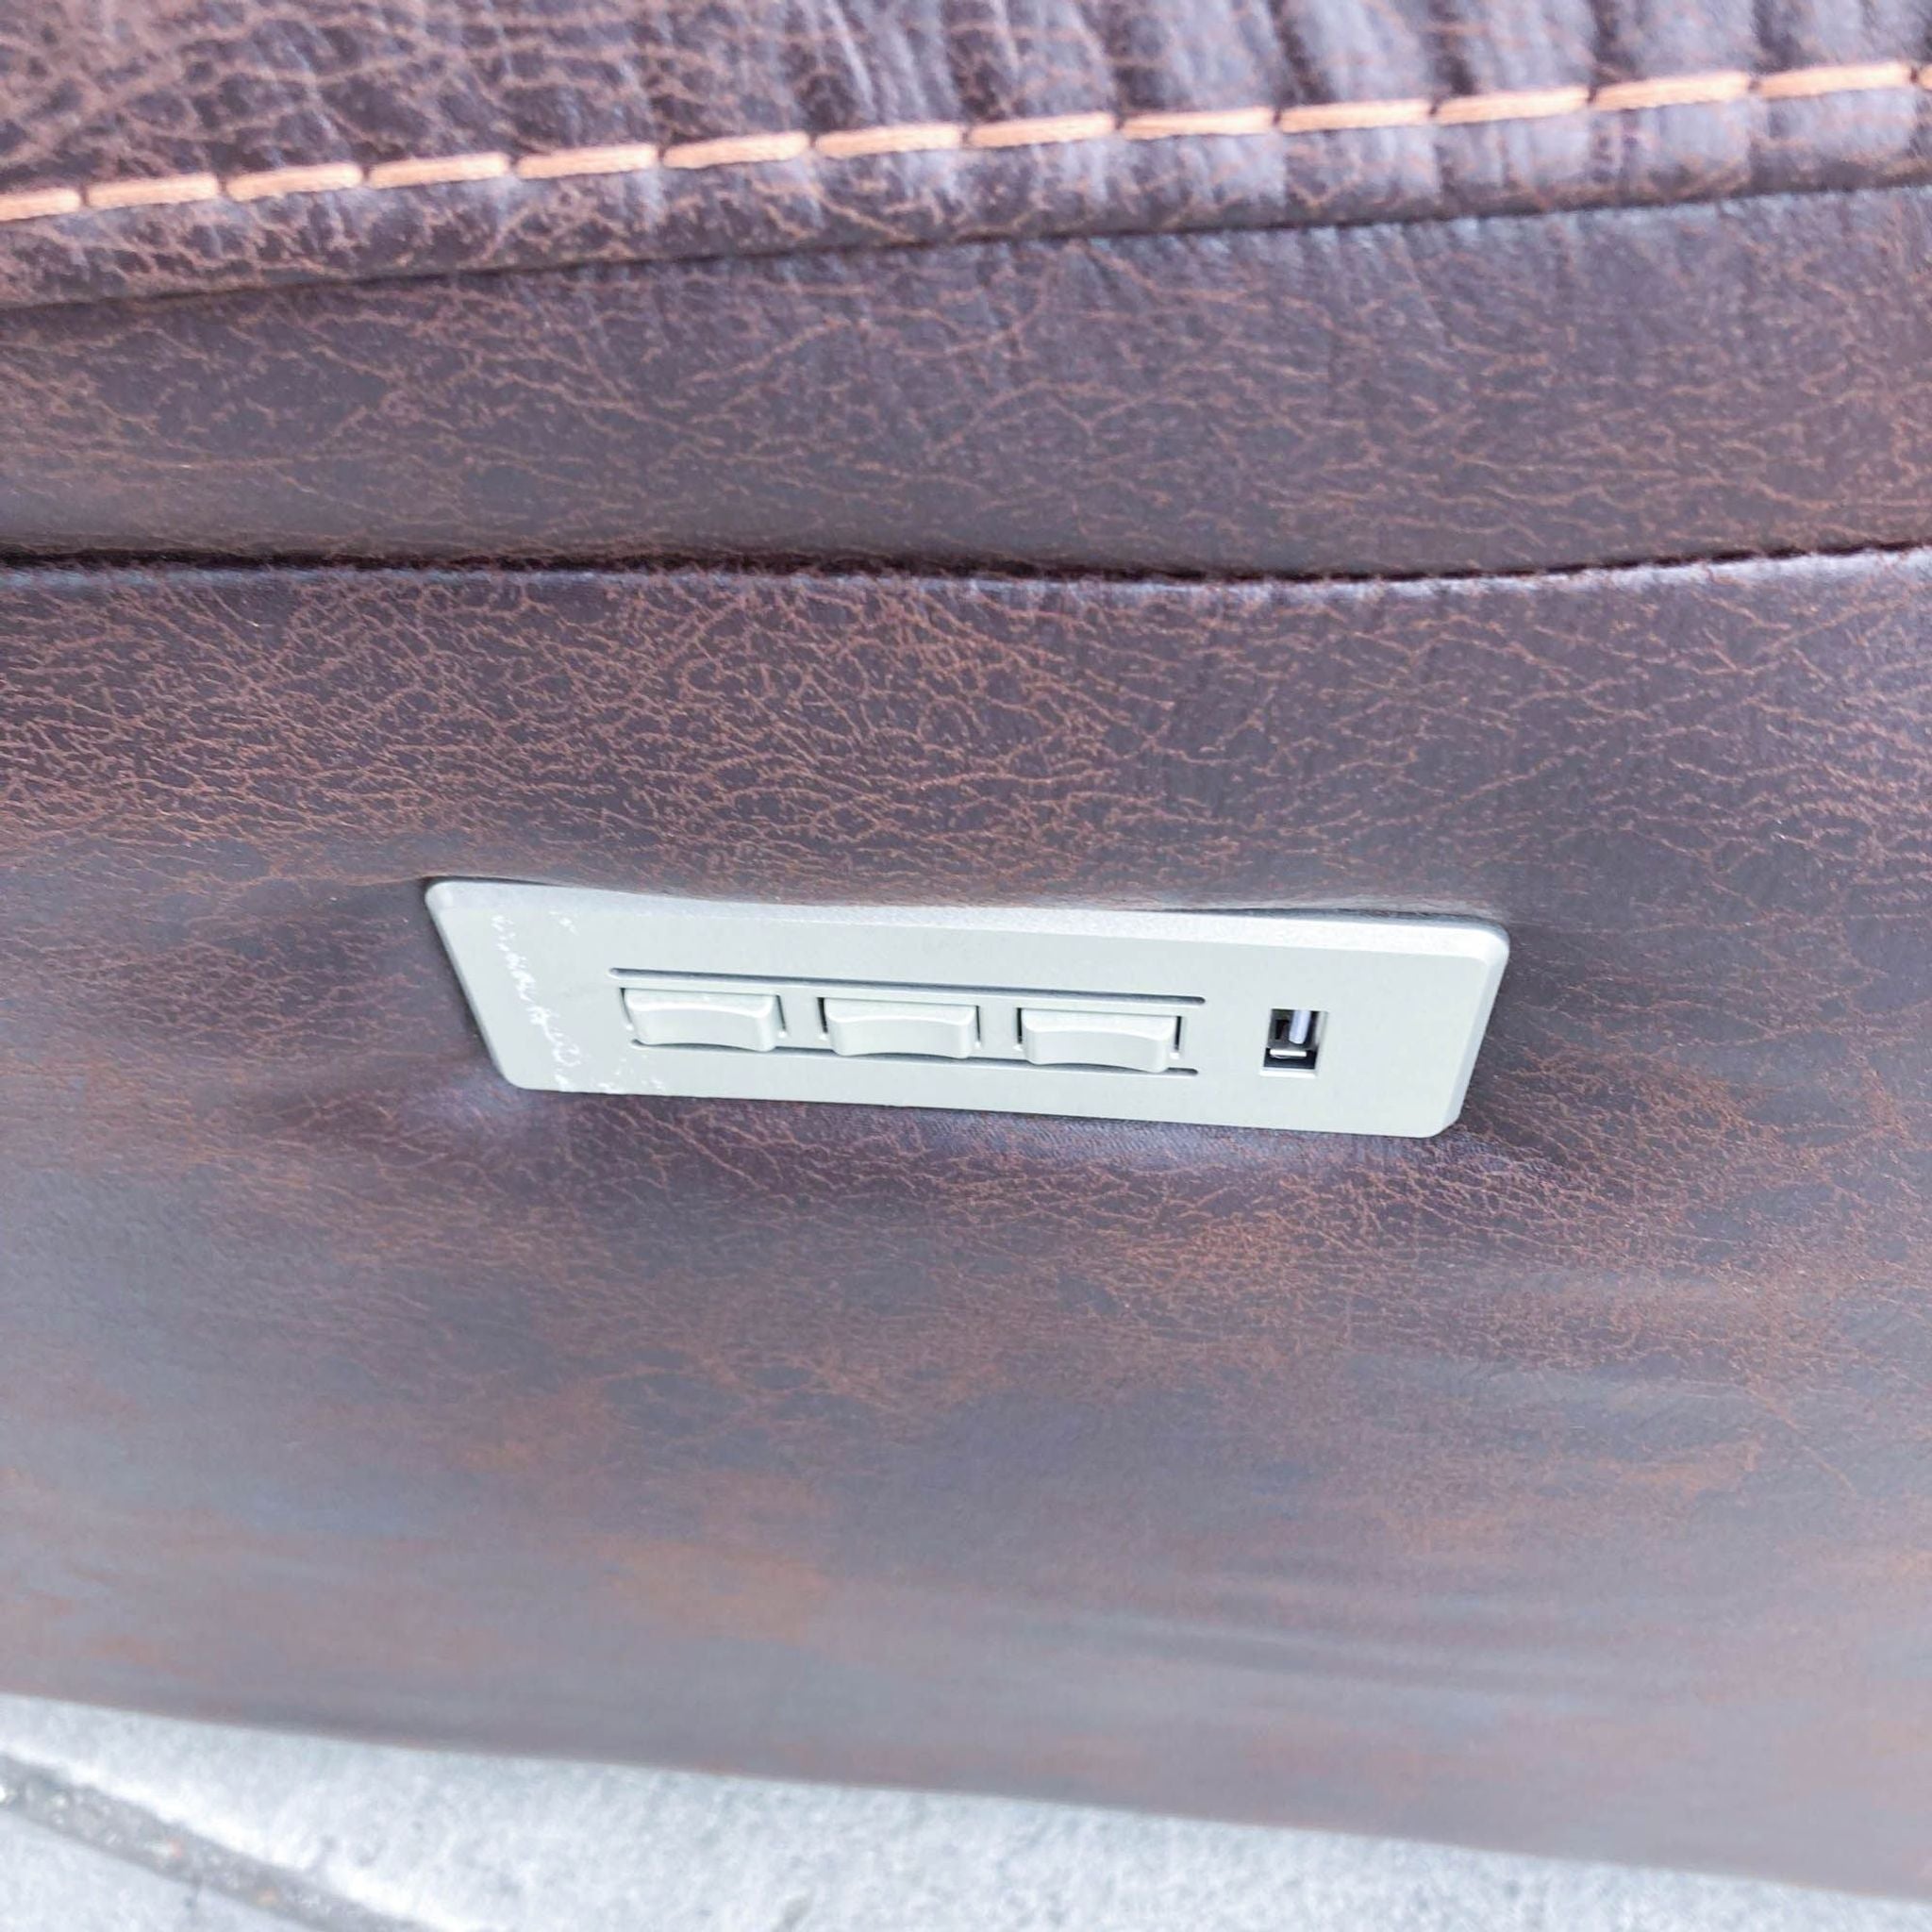 Close-up of built-in USB ports on the side of a brown faux leather loveseat for device charging.